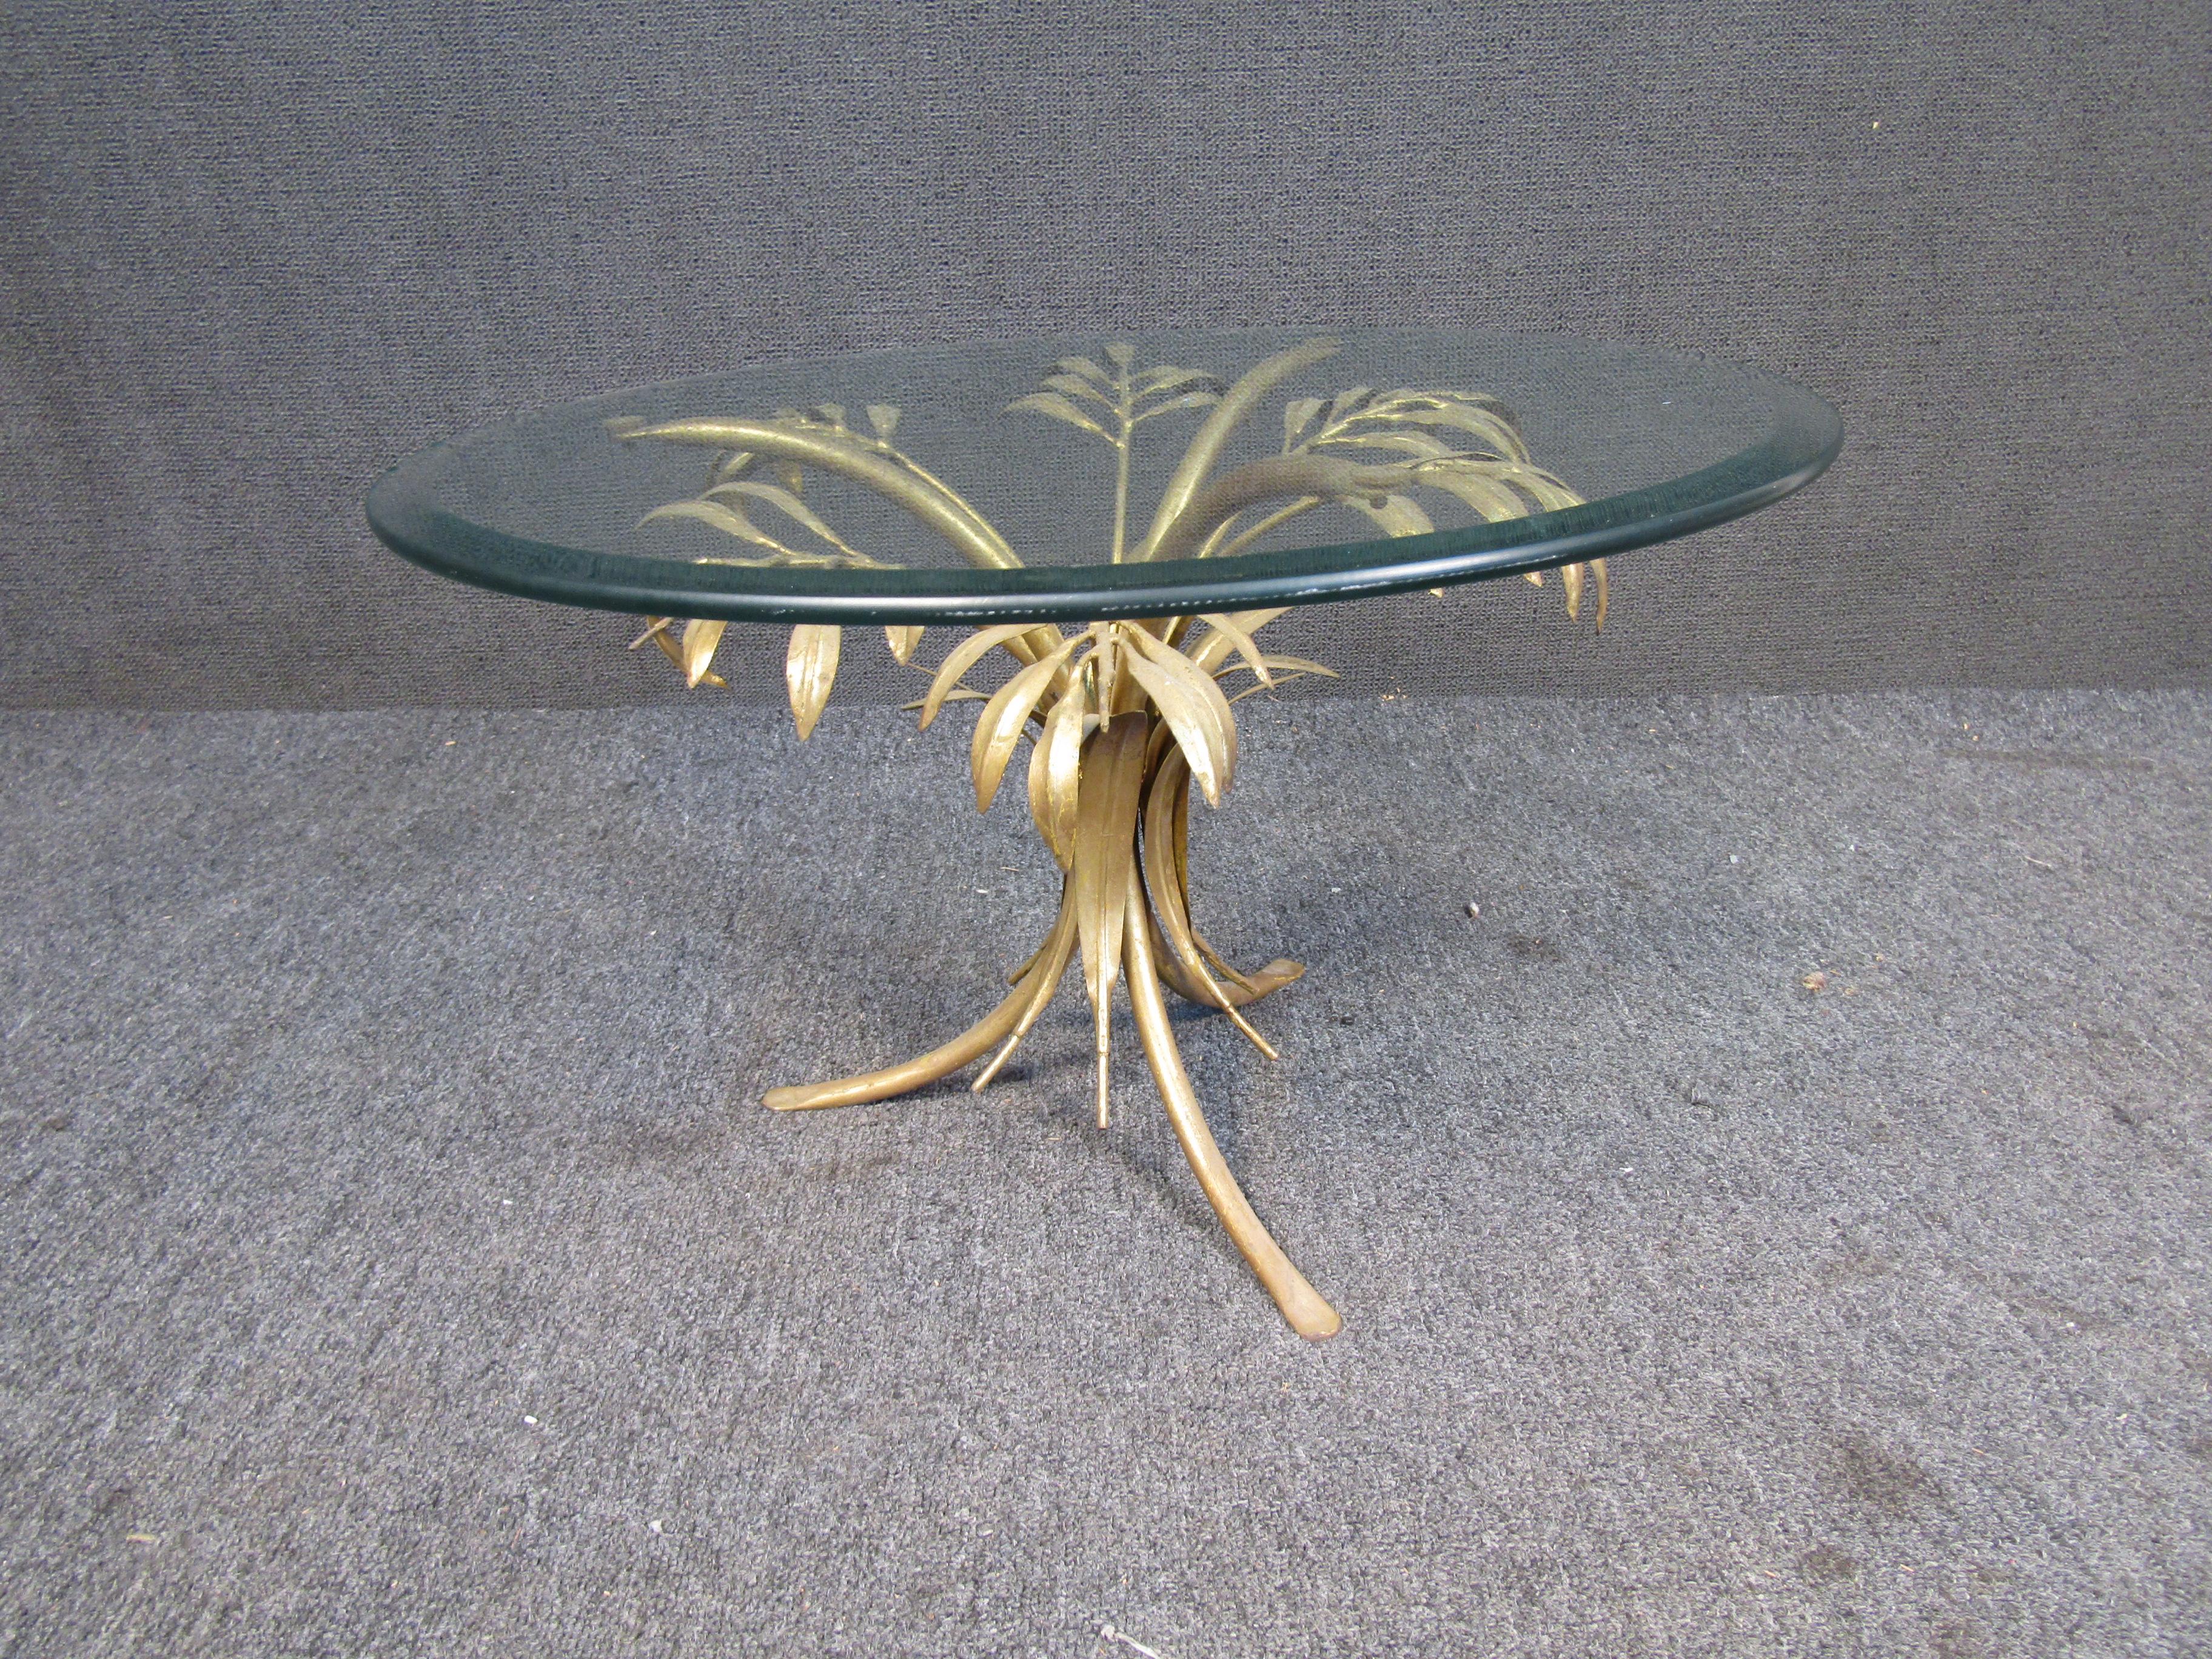 With intricate gold leaf palm tree-themed designs as its stand, this unique side table features a large rounded top of thick glass. Please confirm item location with seller (NY/NJ).